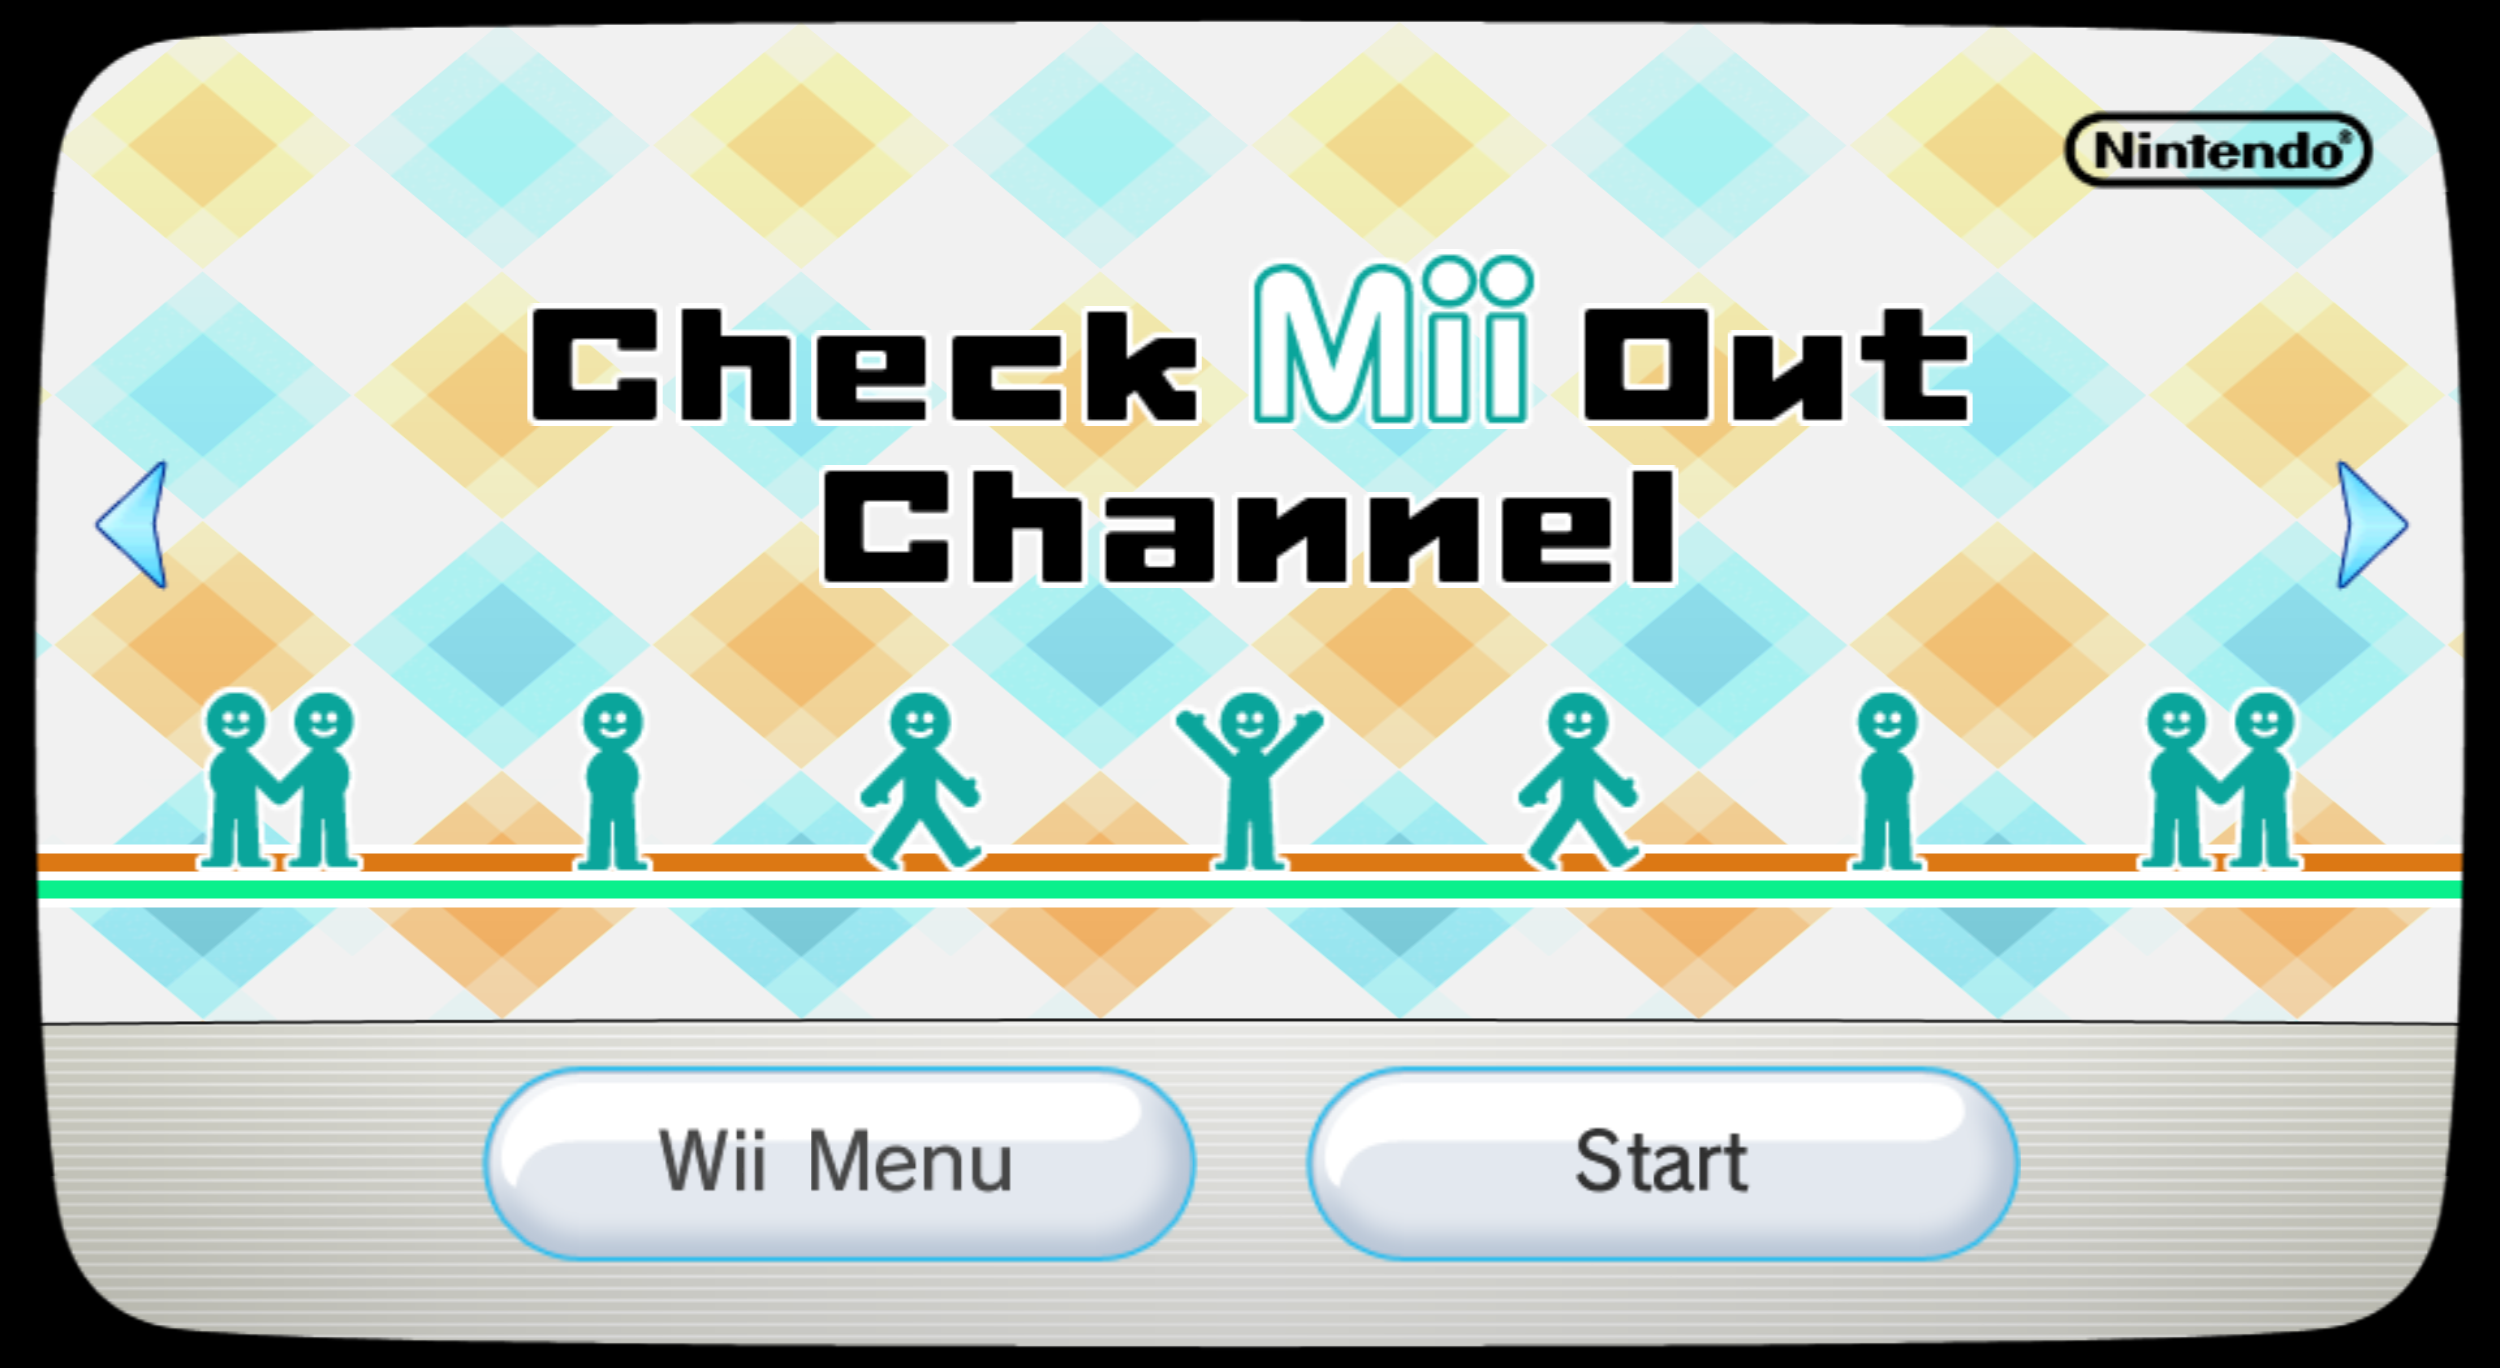 Check Mii Out Channel